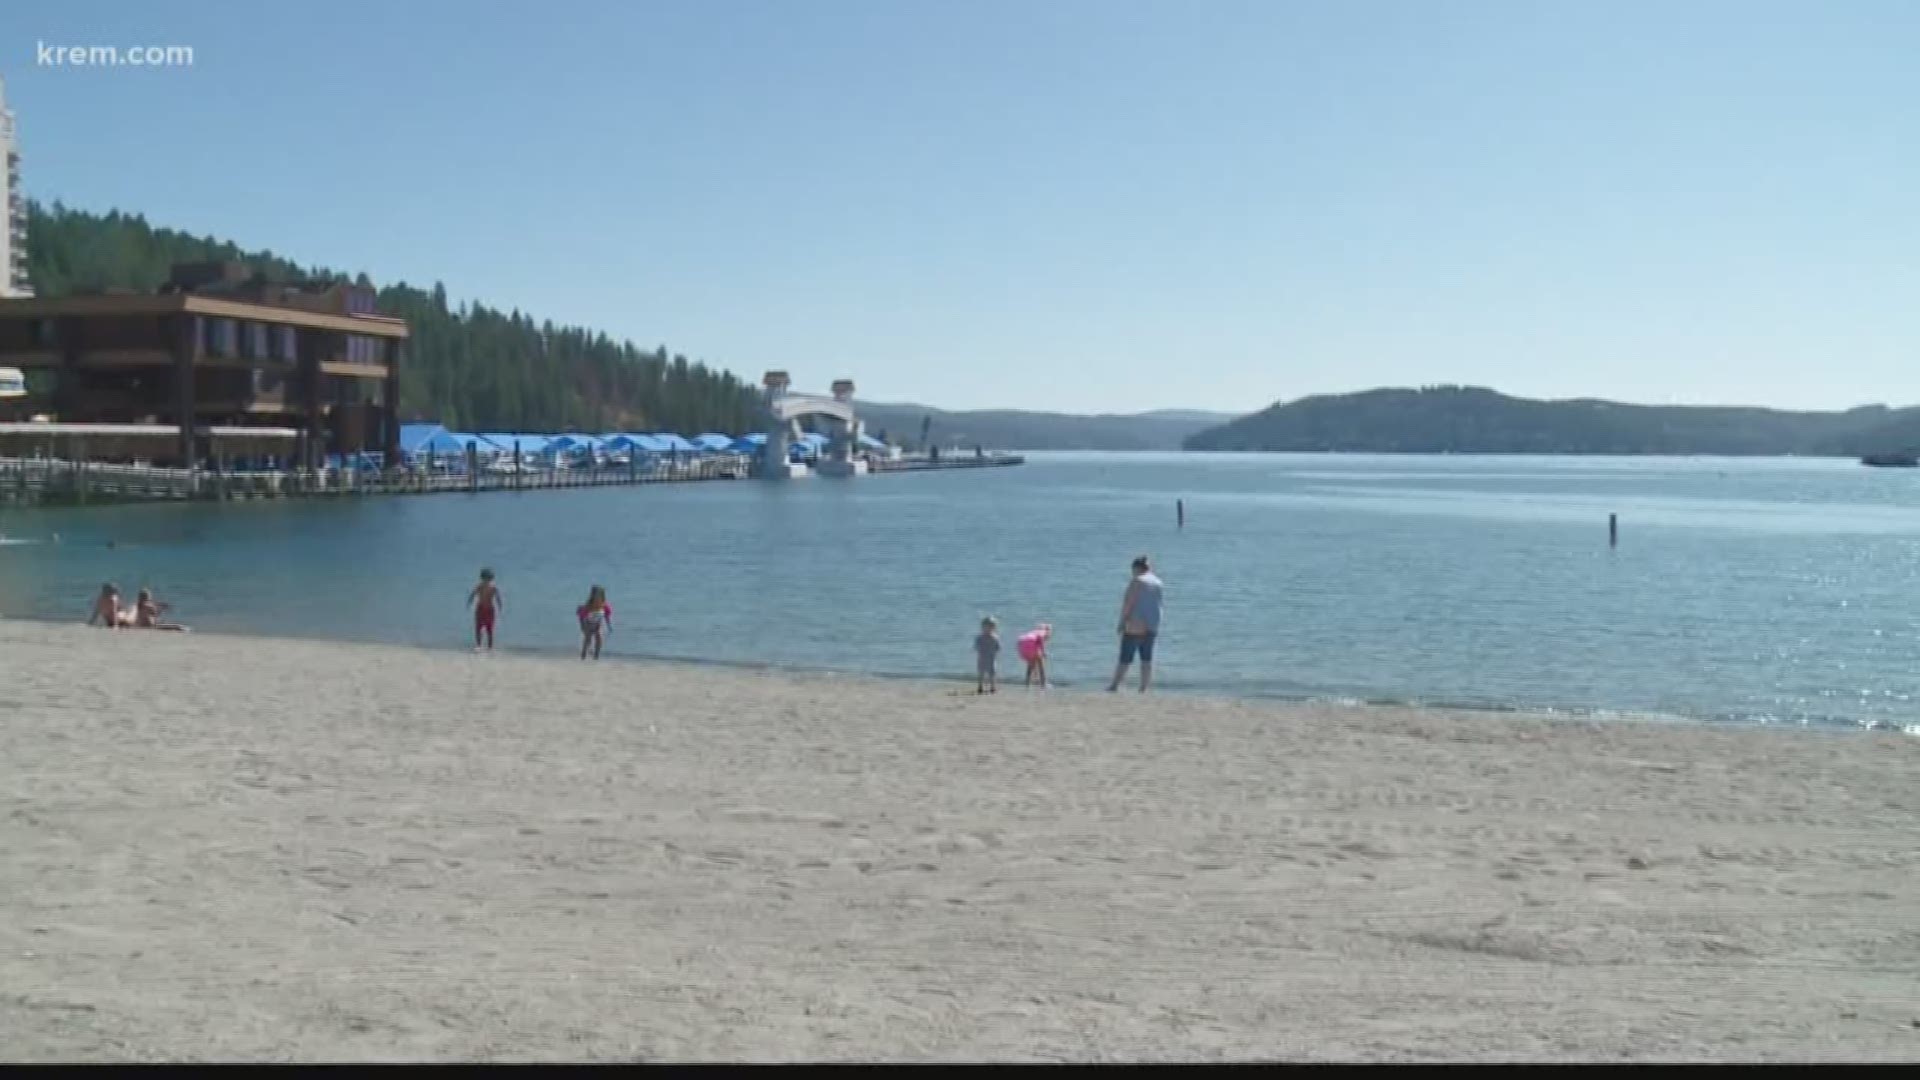 KREM's Taylor Viydo spoke with tourists and businesses in Coeur d'Alene about the impact of a less smokey summer than 2018.